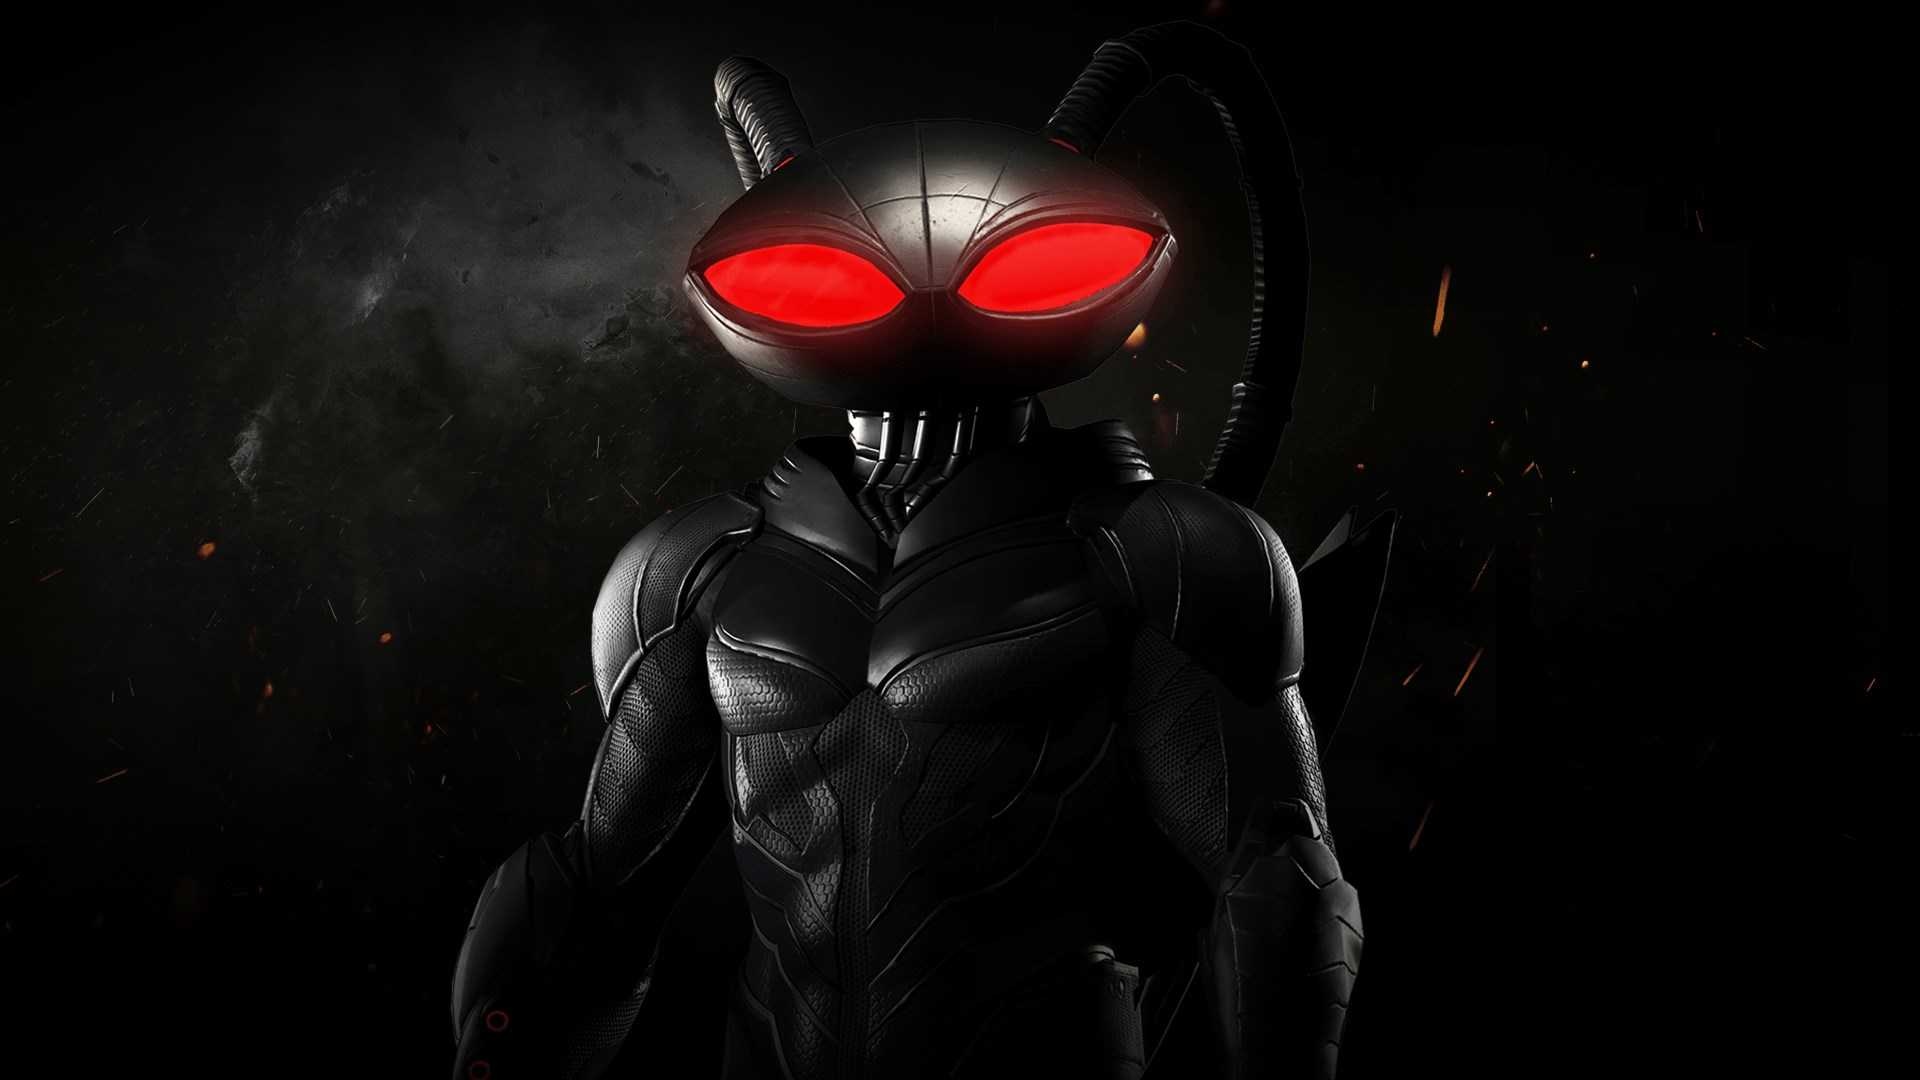 Injustice 2 character, Black Manta purchase, Xbox store, Gaming release, 1920x1080 Full HD Desktop